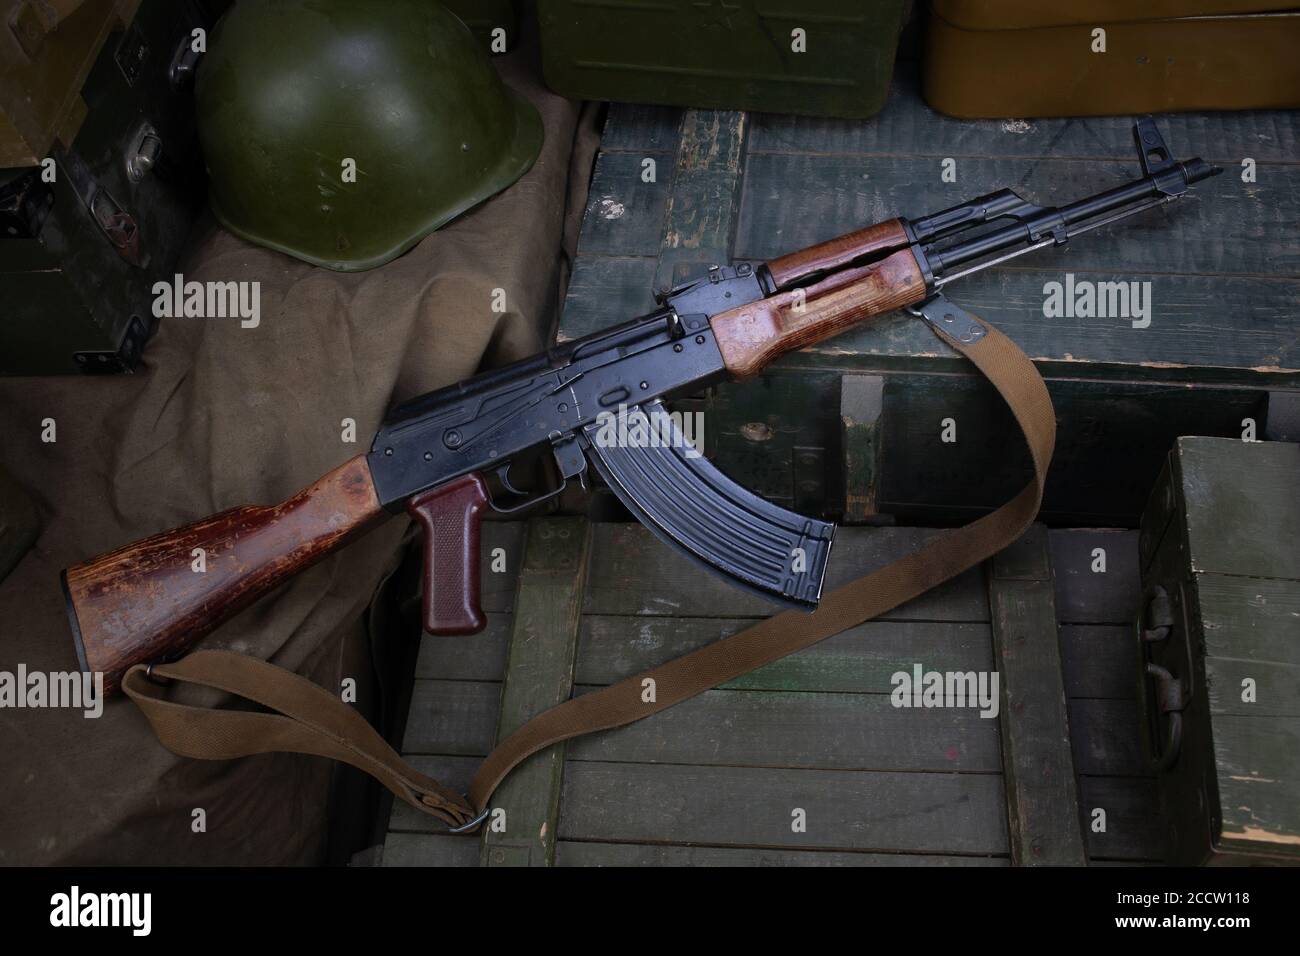 AK 47 gun with ammunitions on army green box background Stock Photo